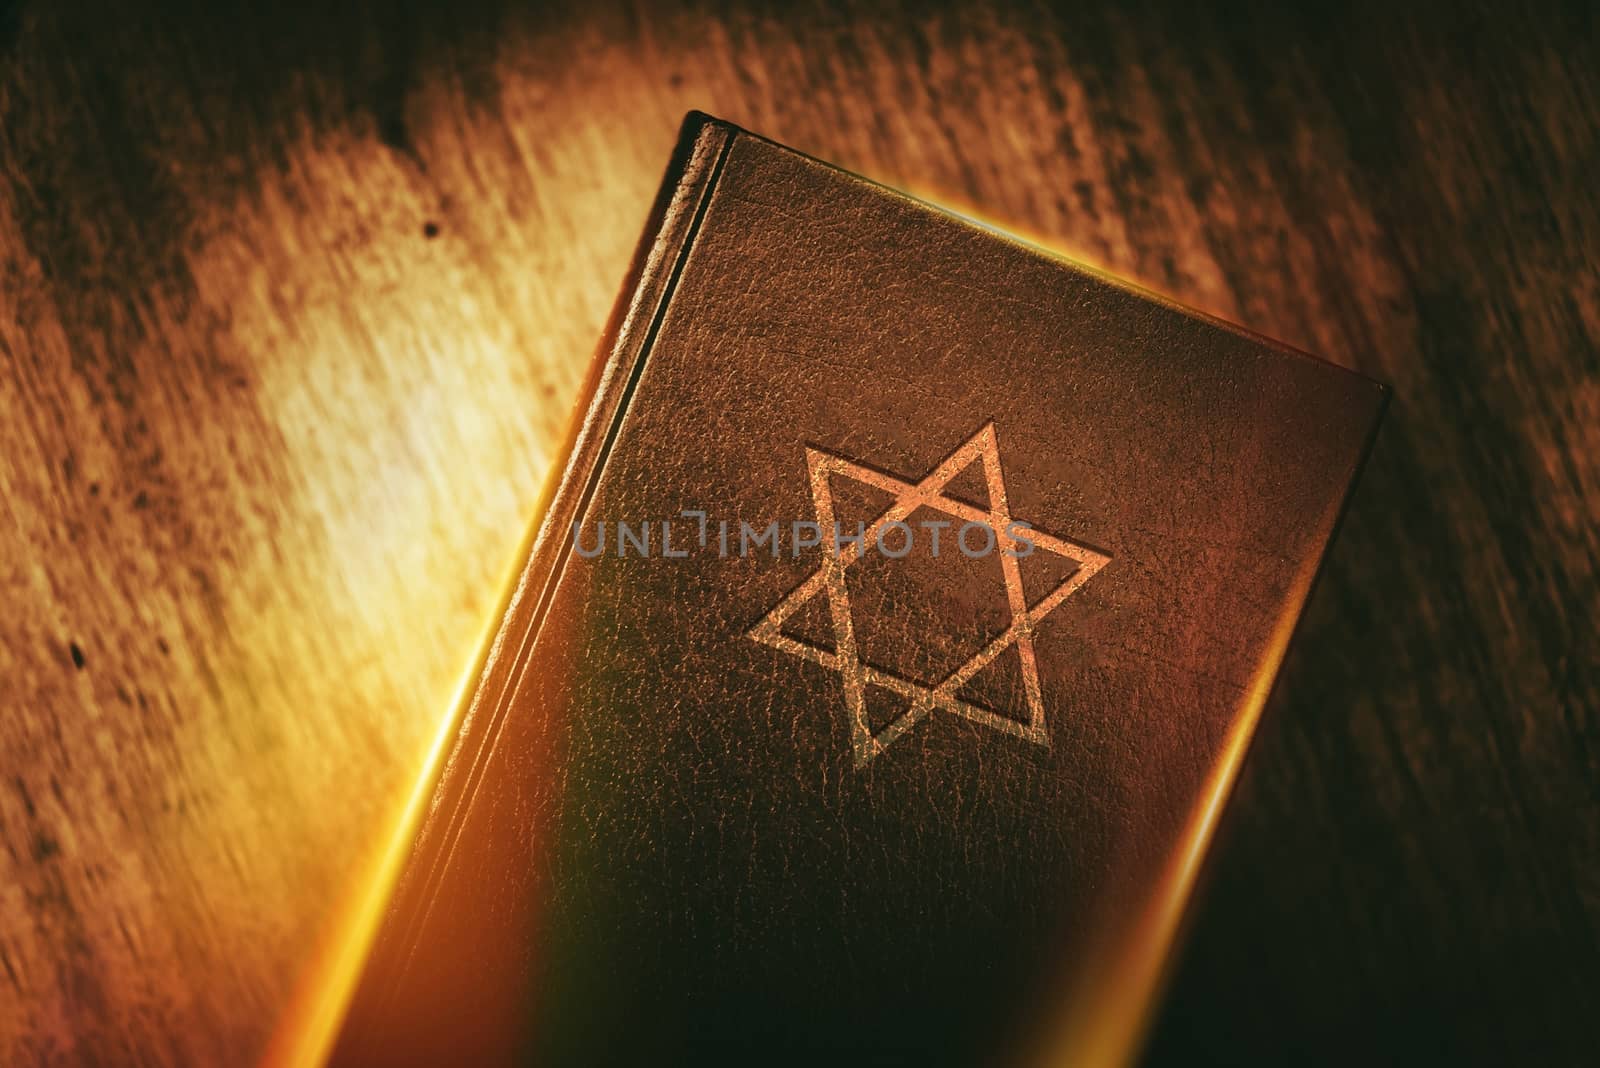 The Book of Judaism by welcomia